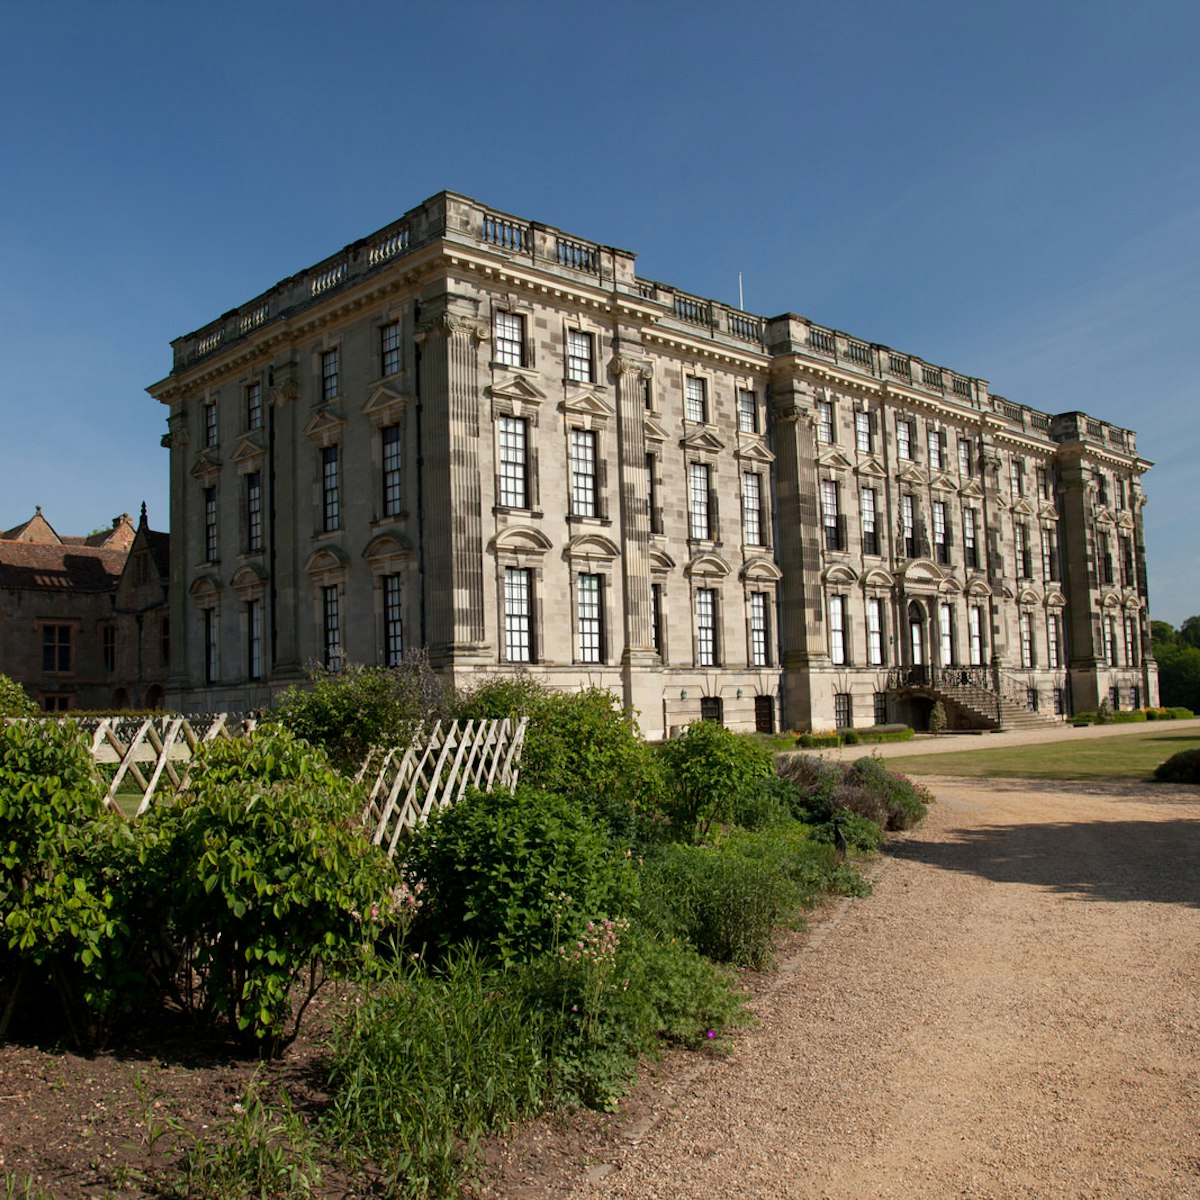 Stoneleigh Abbey a stately home with landscaped parkland visted by Jane Austen .; Shutterstock ID 81762157; Your name (First / Last): Emma Sparks; GL account no.: 65050; Netsuite department name: Online Editorial; Full Product or Project name including edition: Best in Europe POI updates